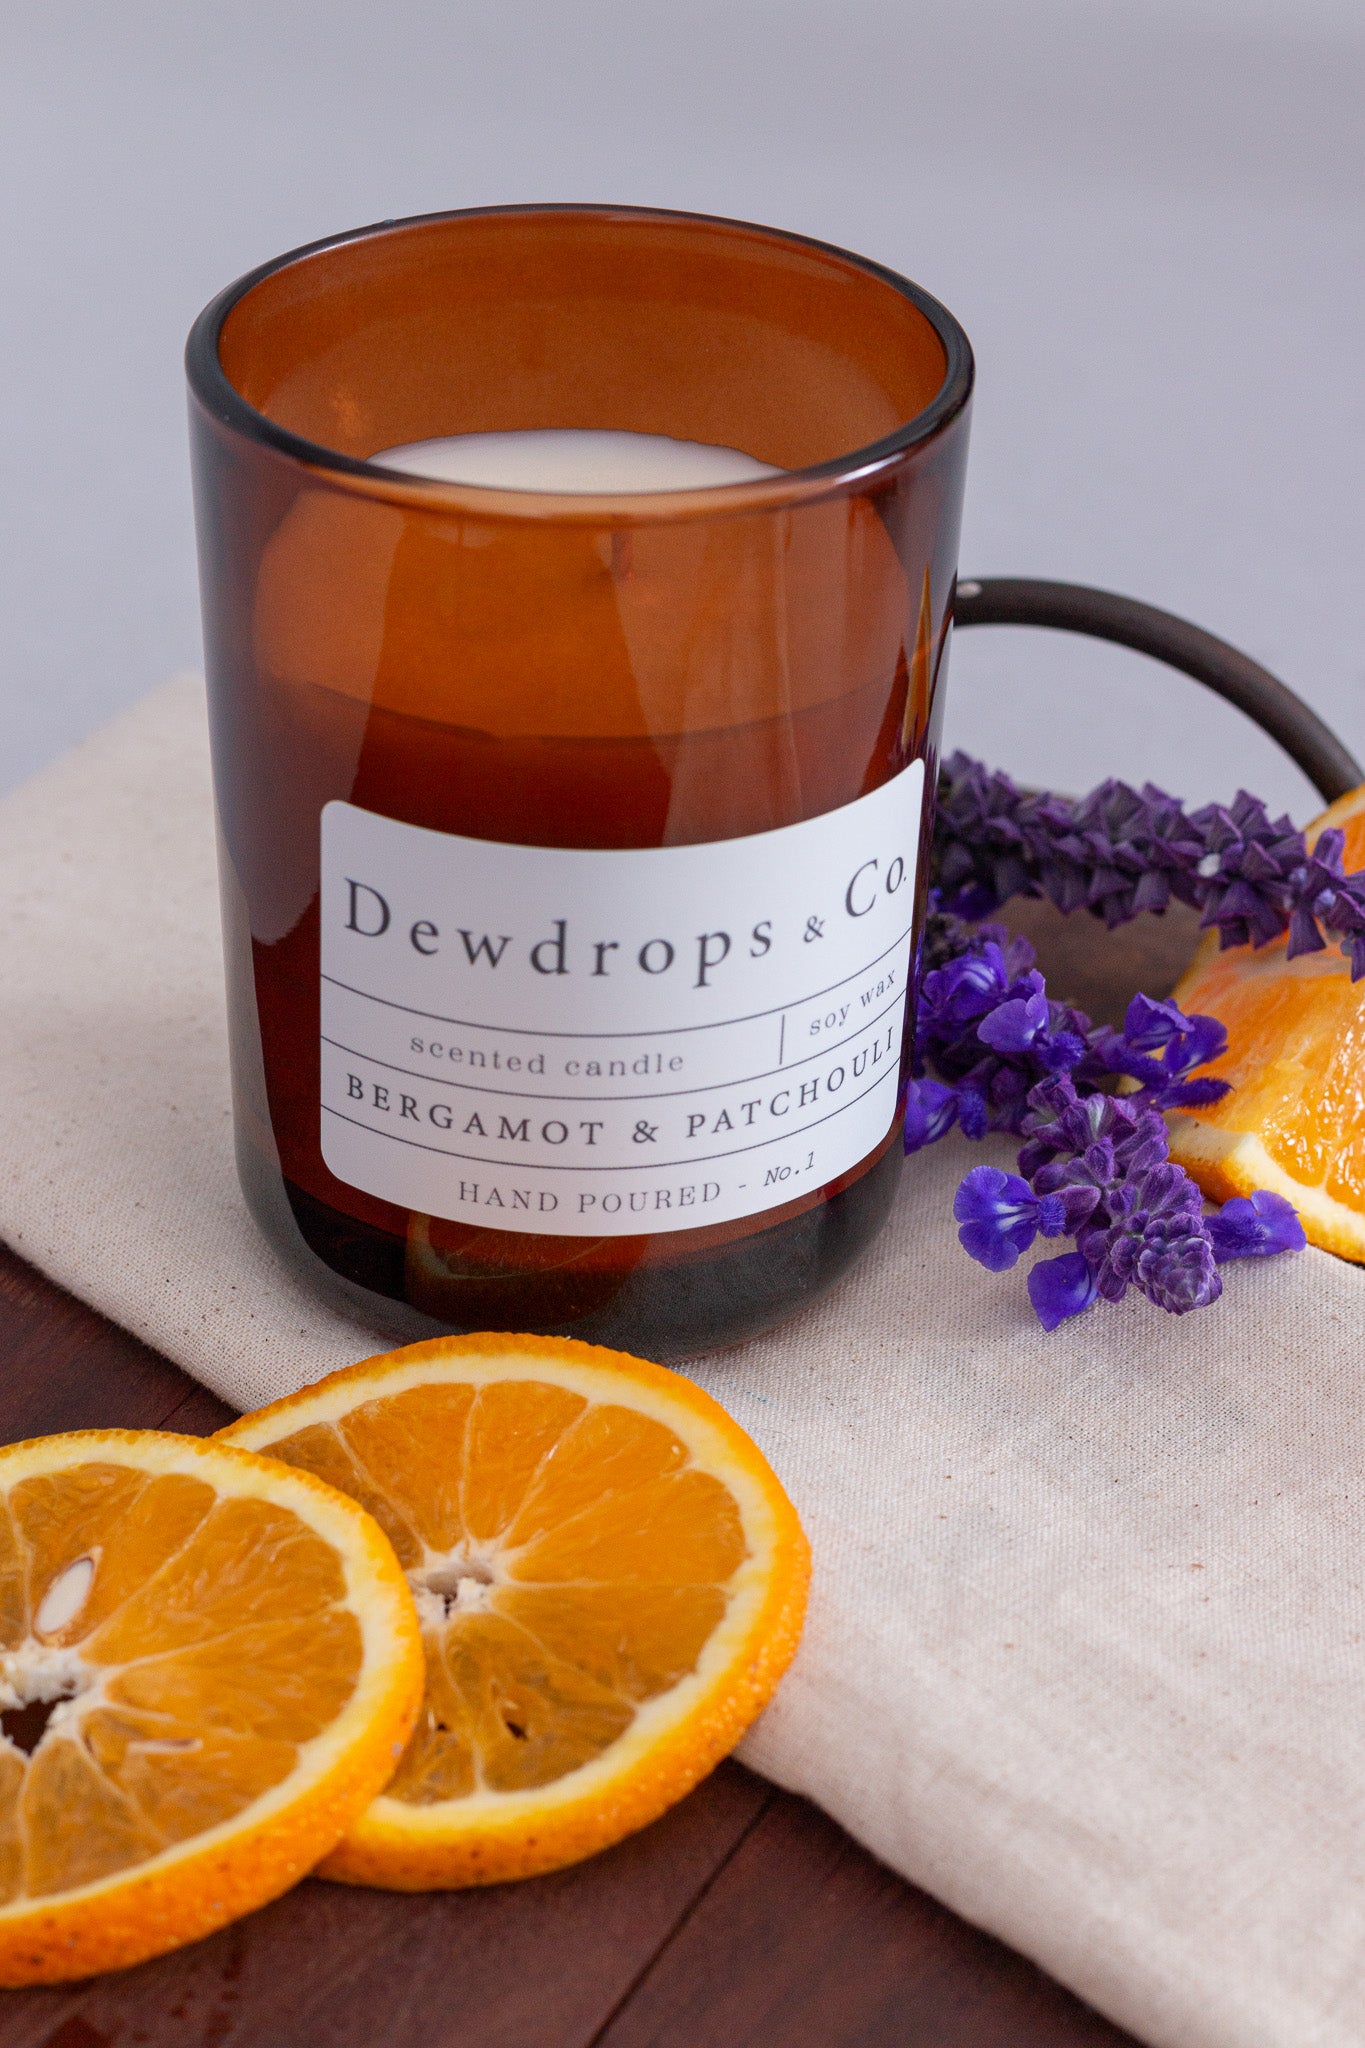 No.1 Bergamot & Patchouli Scented Candle - Amber